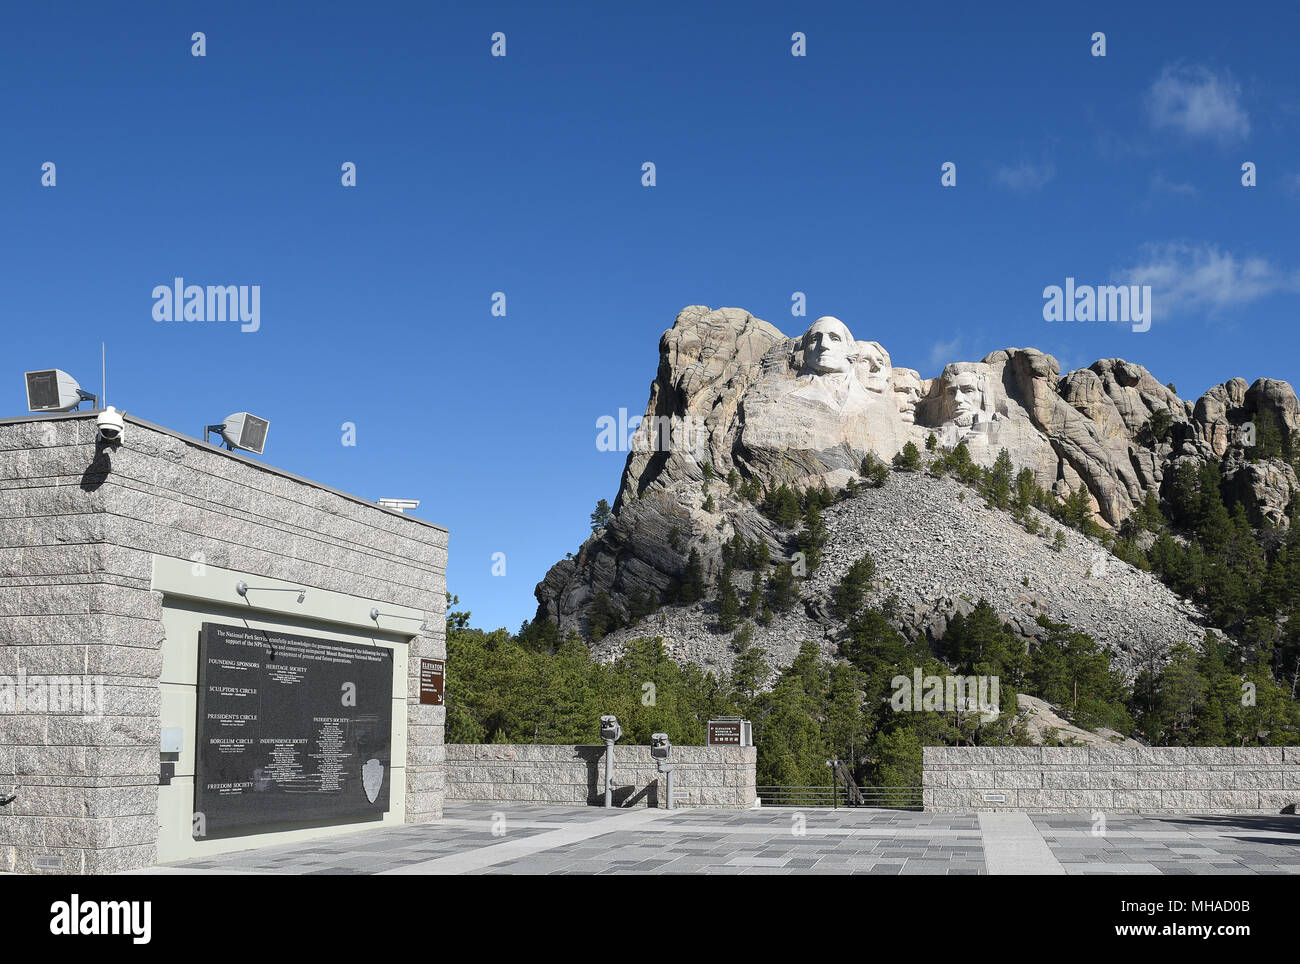 Grand View Terrace at Mount Rushmore National Memorial, a massive sculpture carved into Mount Rushmore in the Black Hills region of South Dakota. Stock Photo